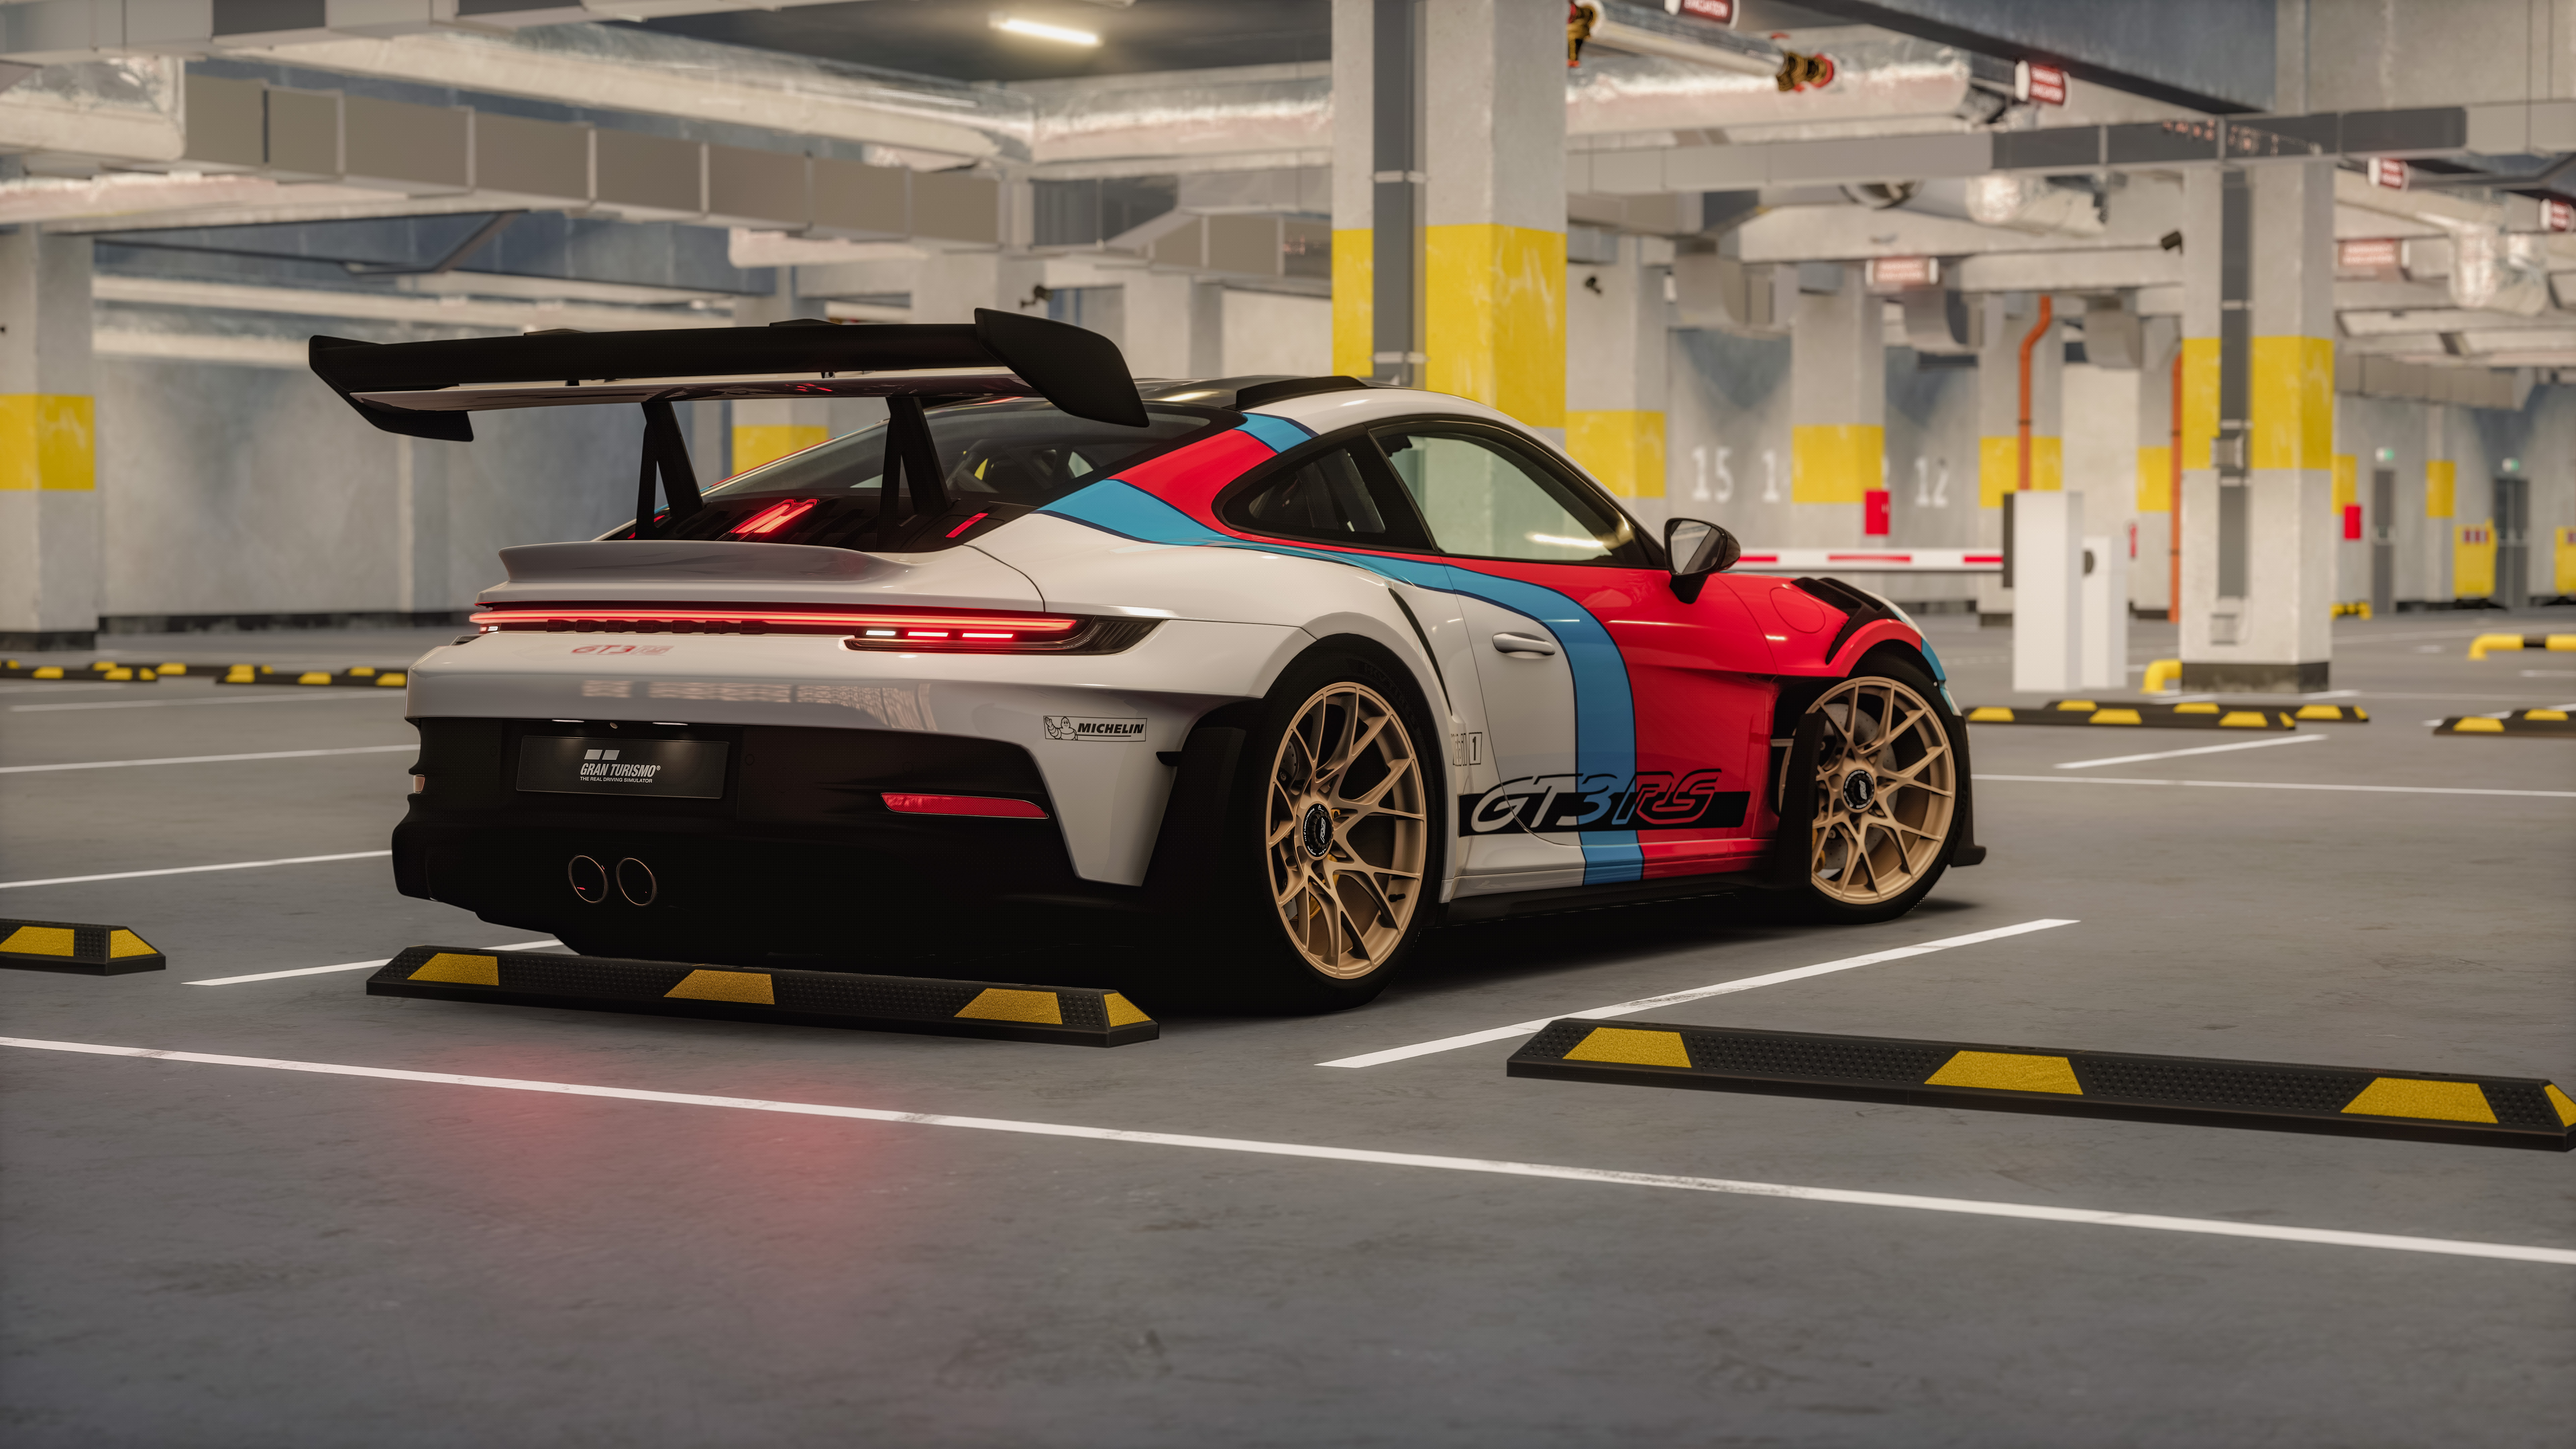 General 7680x4320 Porsche 911 gt3rs car Assetto Corsa PC gaming Gran Turismo garage interior car spoiler Michelin video games video game art screen shot rear view parking lot lights CGI taillights vehicle ceiling lights